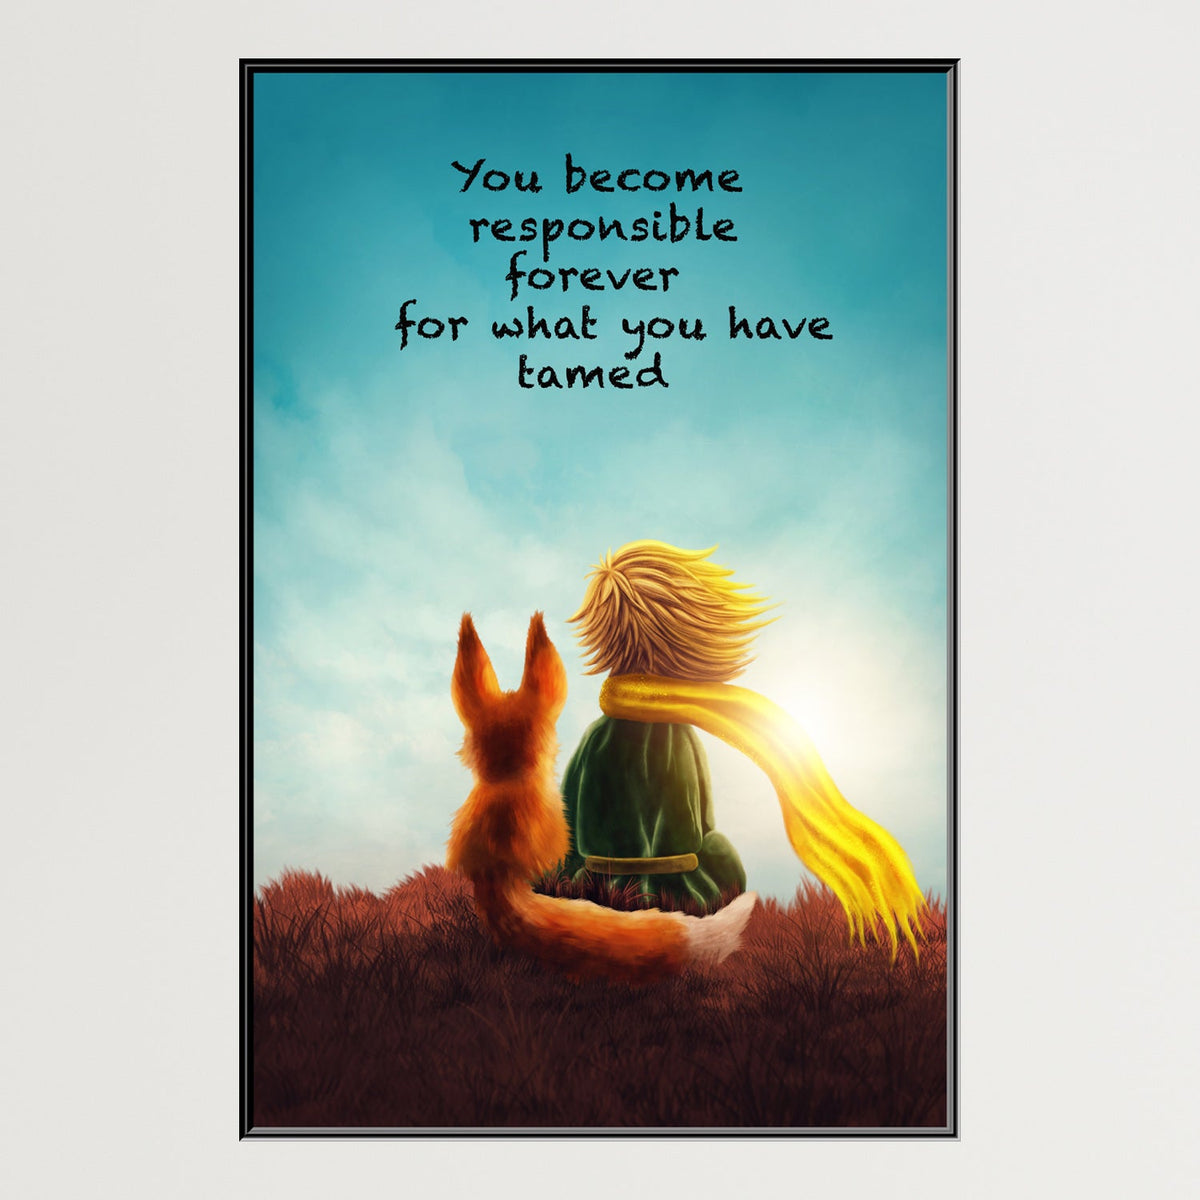 https://cdn.shopify.com/s/files/1/0387/9986/8044/products/TheFoxQuotefromTheLittlePrinceCanvasArtprintFloatingFrame-Plain.jpg